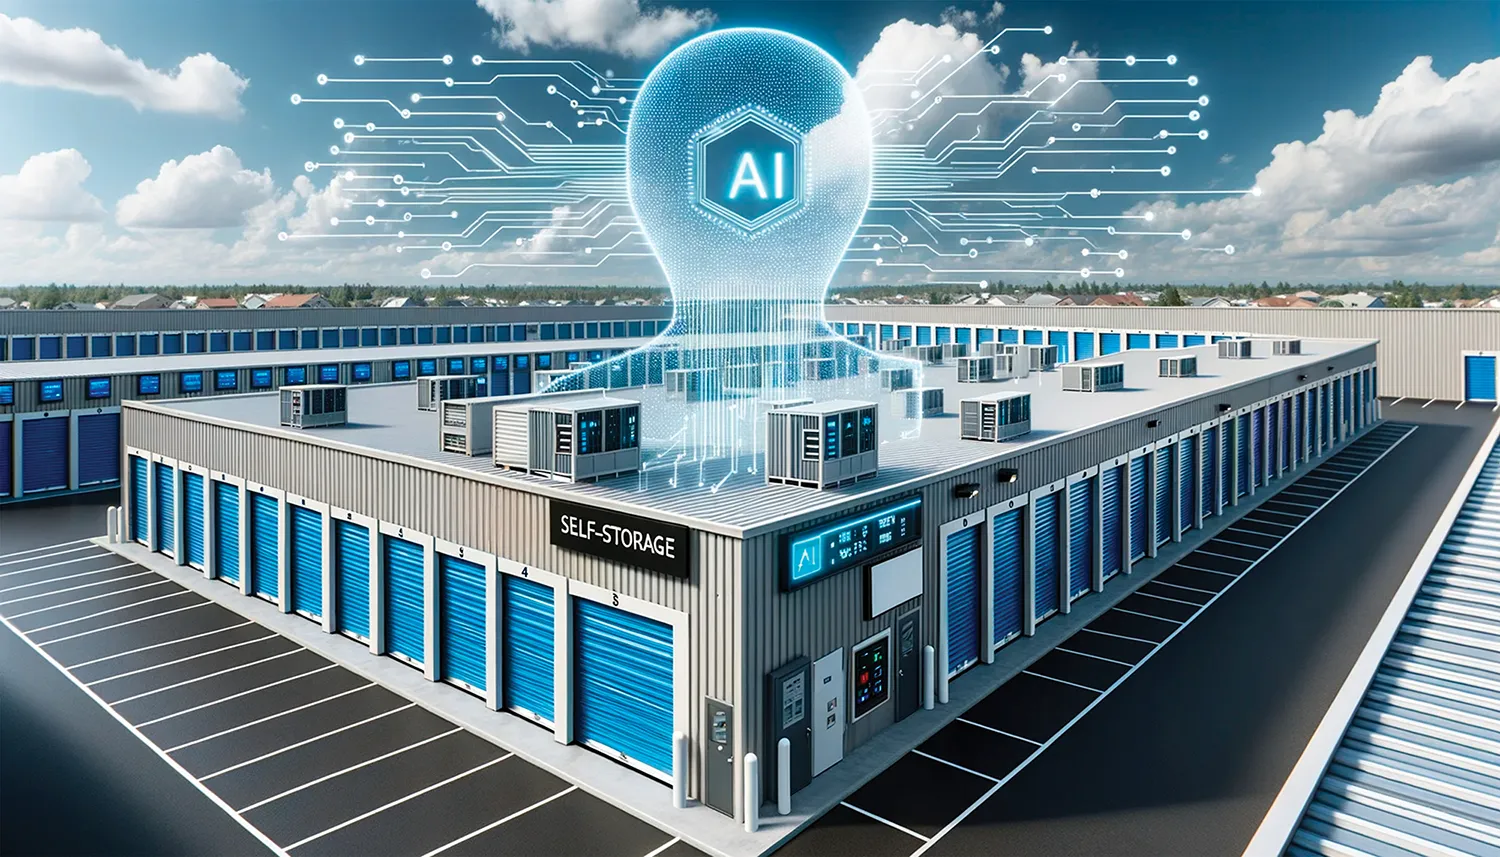 Illustration of a modern storage facility with an AI illustration above it